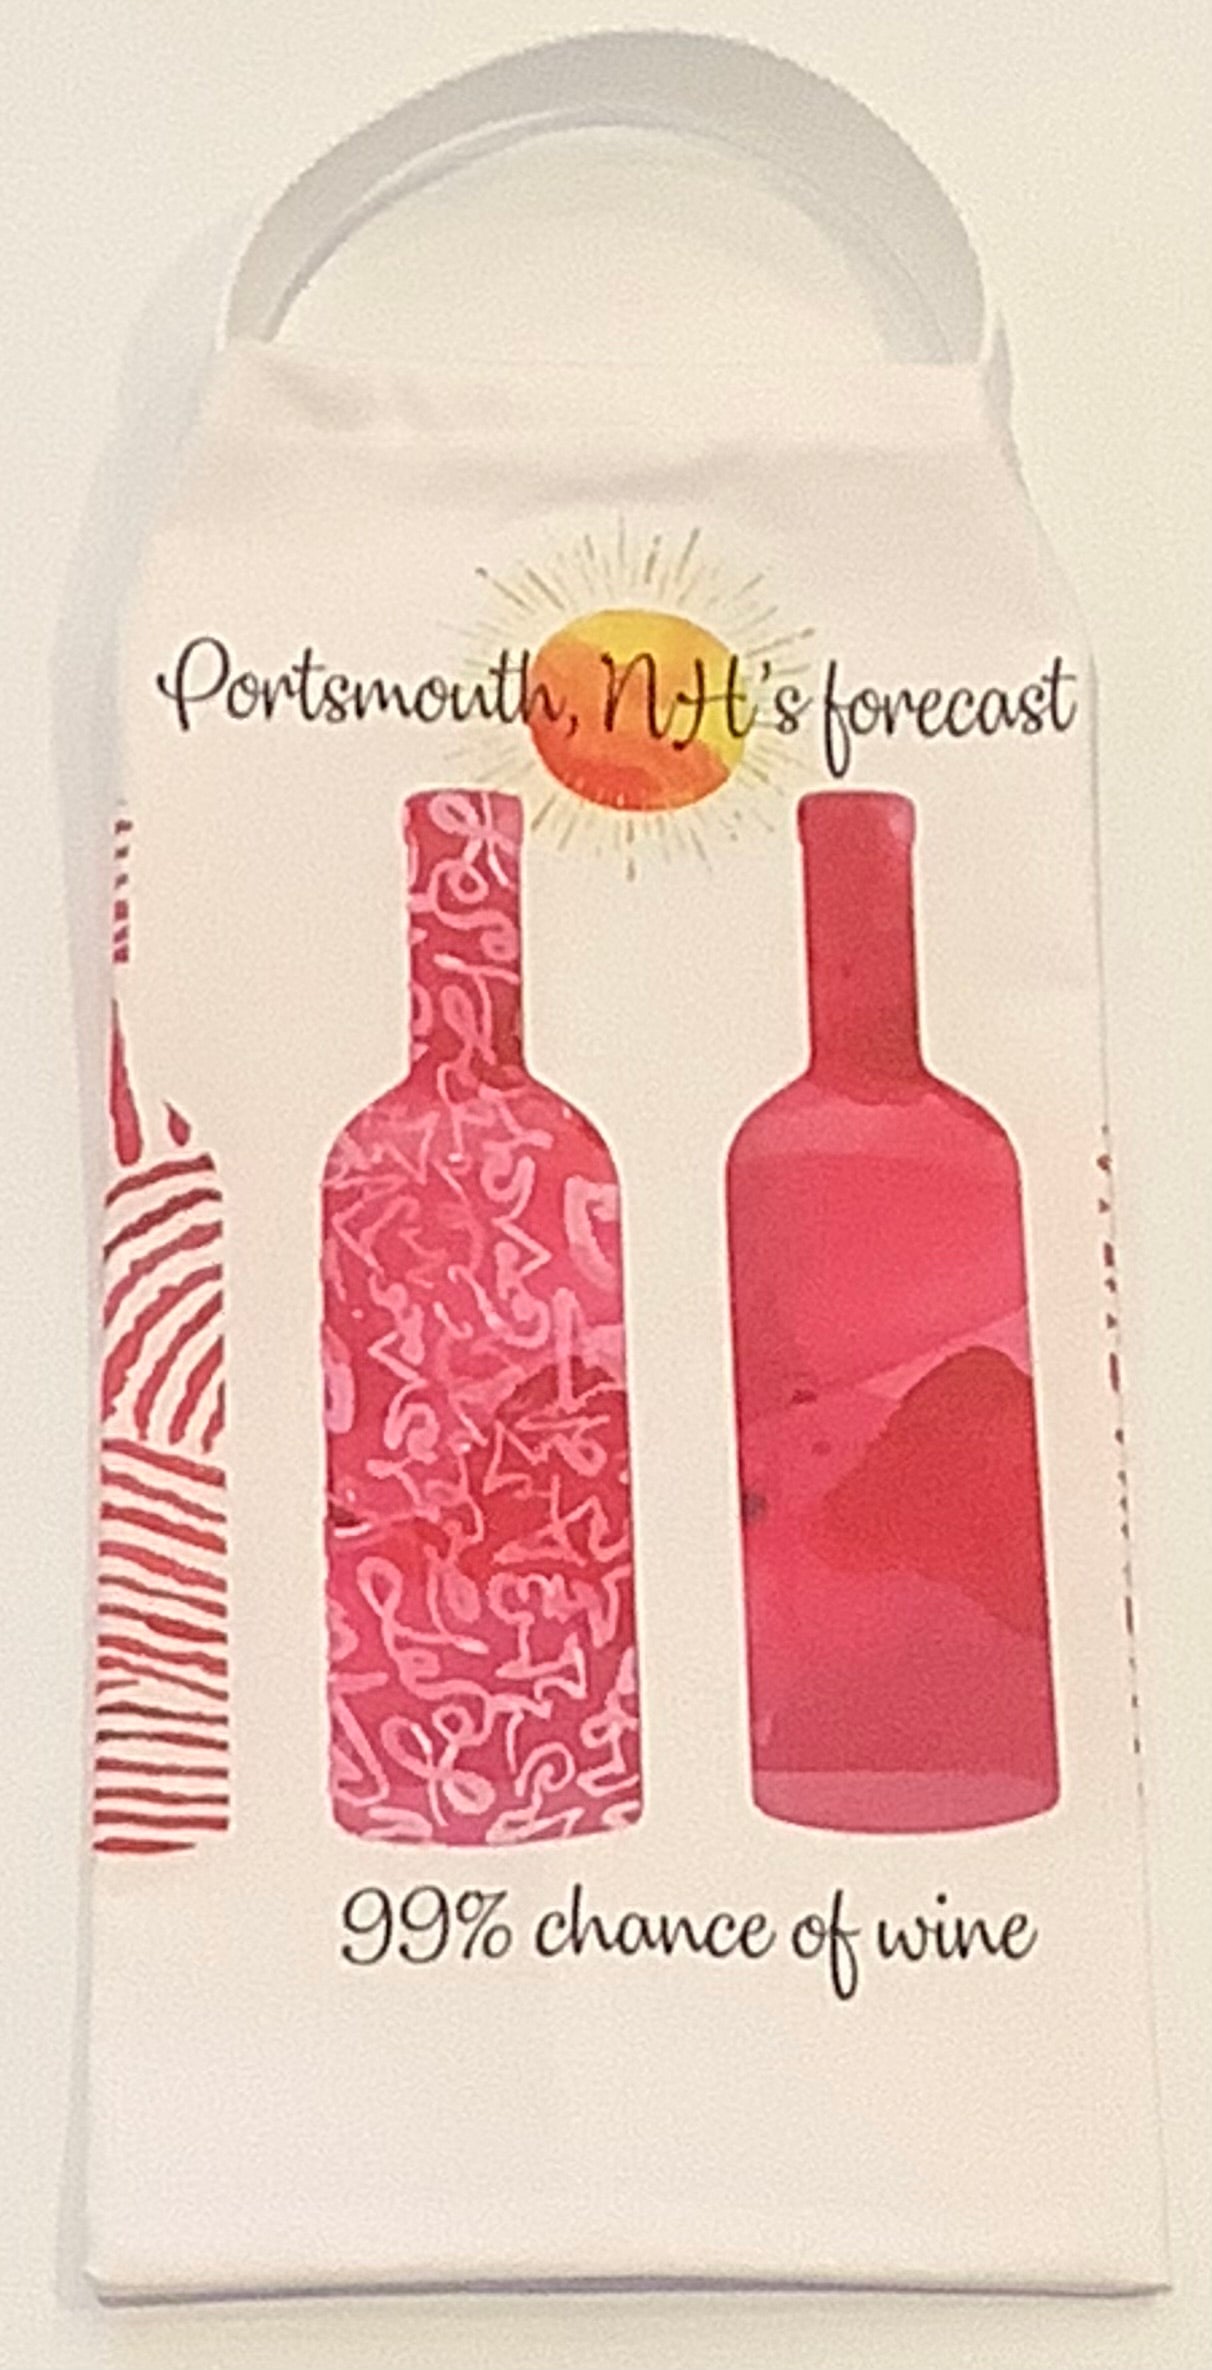 Portsmouth, NH forecast: 99% chance of wine